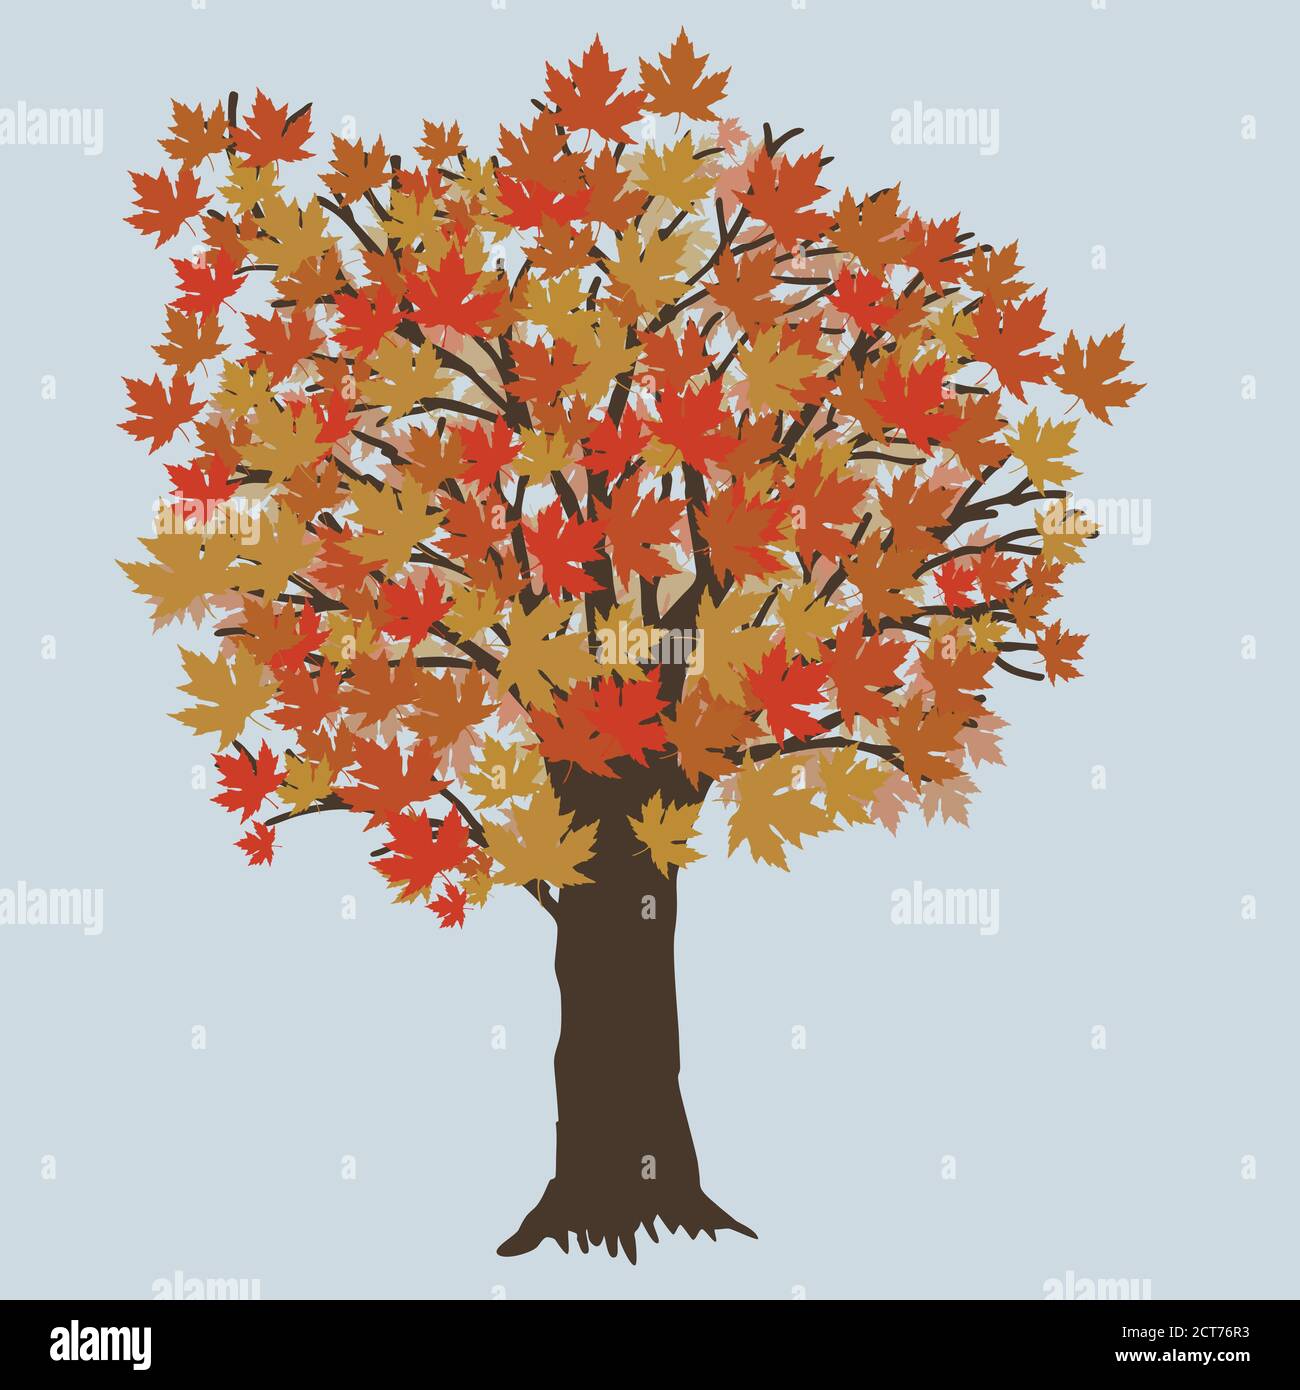 A vector illustration of a maple tree during fall. The tree has orange leafs. Stock Vector